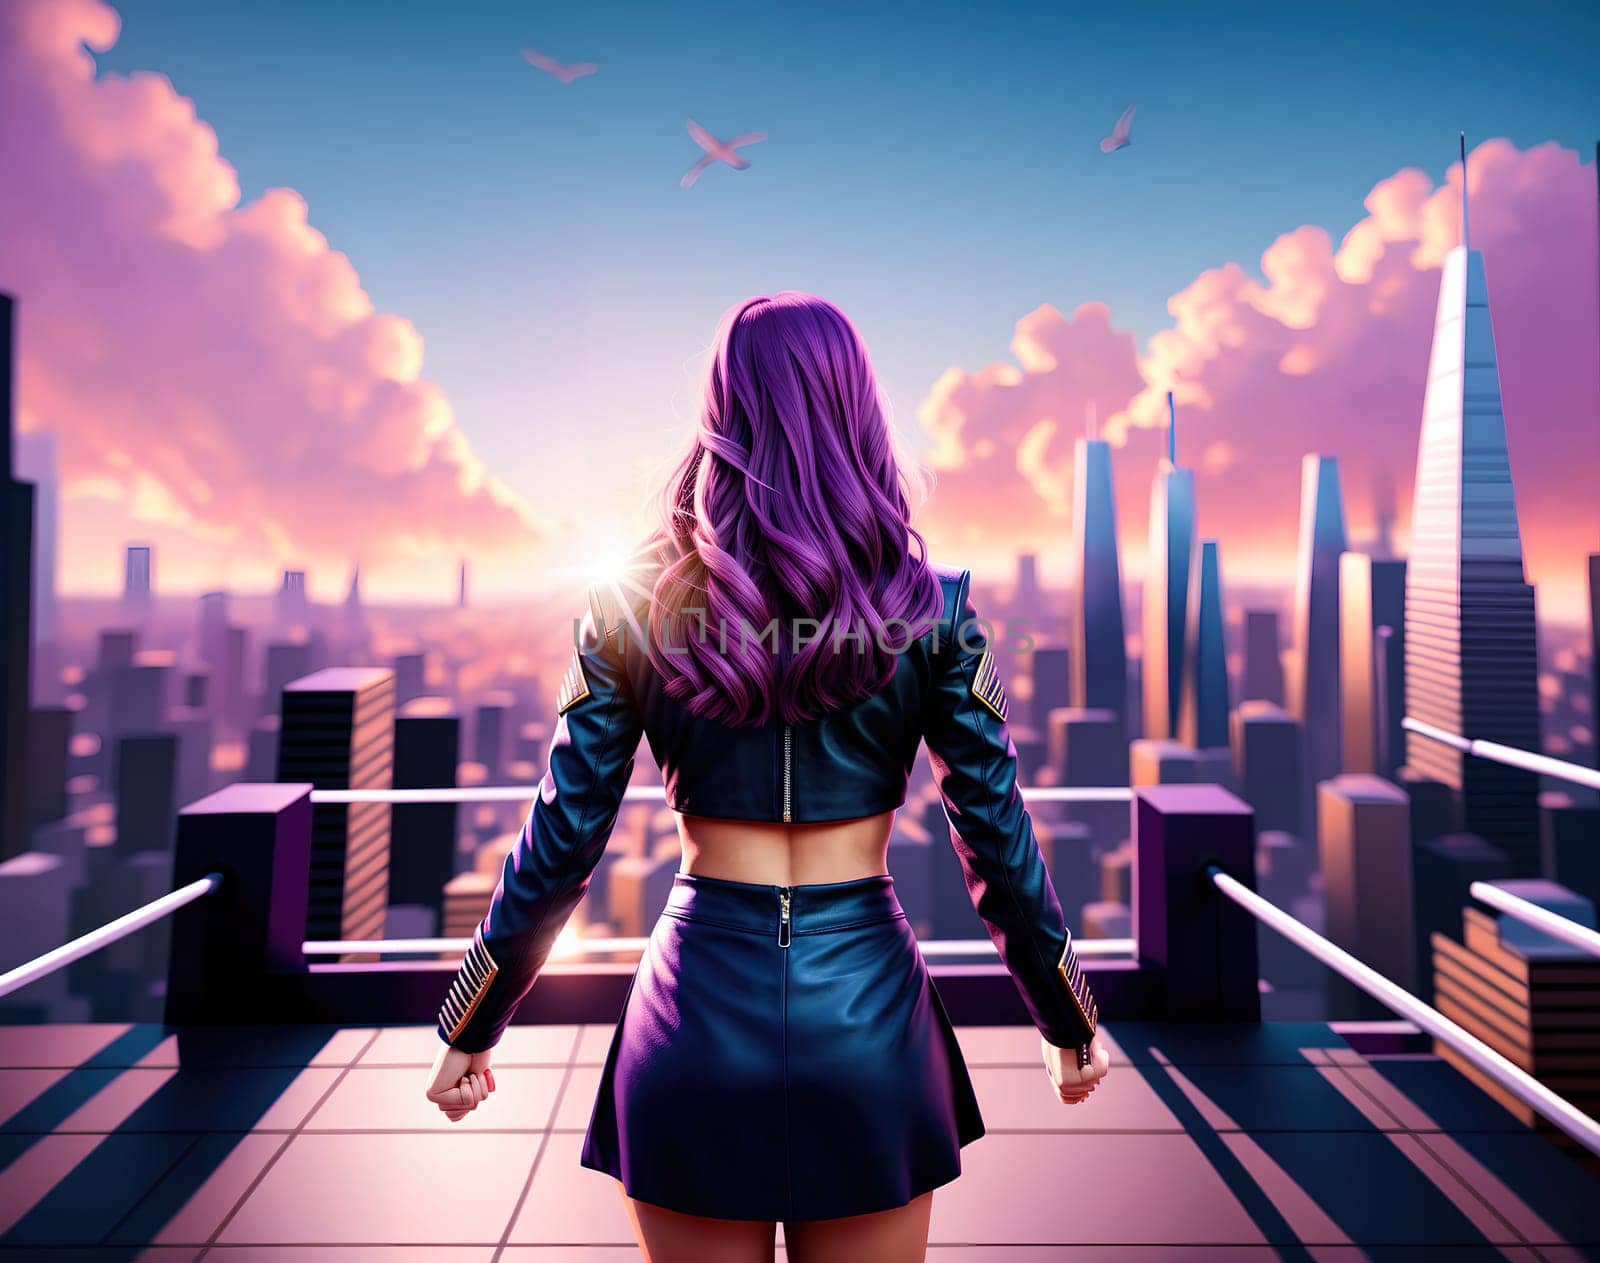 The image depicts a woman standing on a rooftop overlooking a city skyline at sunset, wearing a black leather jacket and sunglasses.